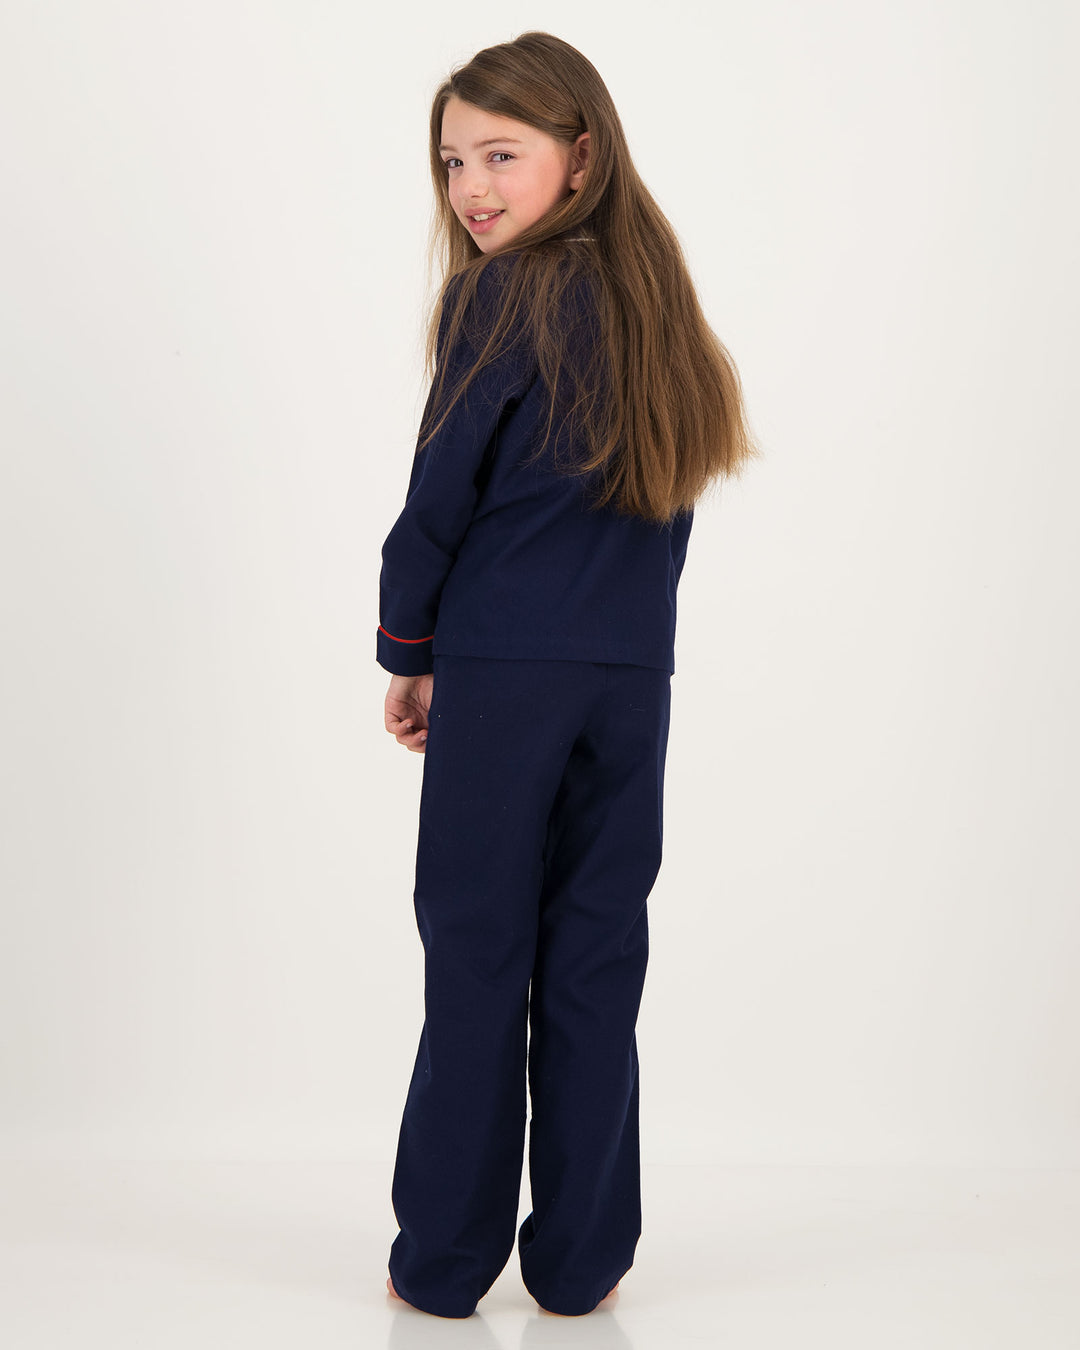 Girls Long Flannel Pyjamas Navy with Red Piping Back - Woodstock Laundry SA